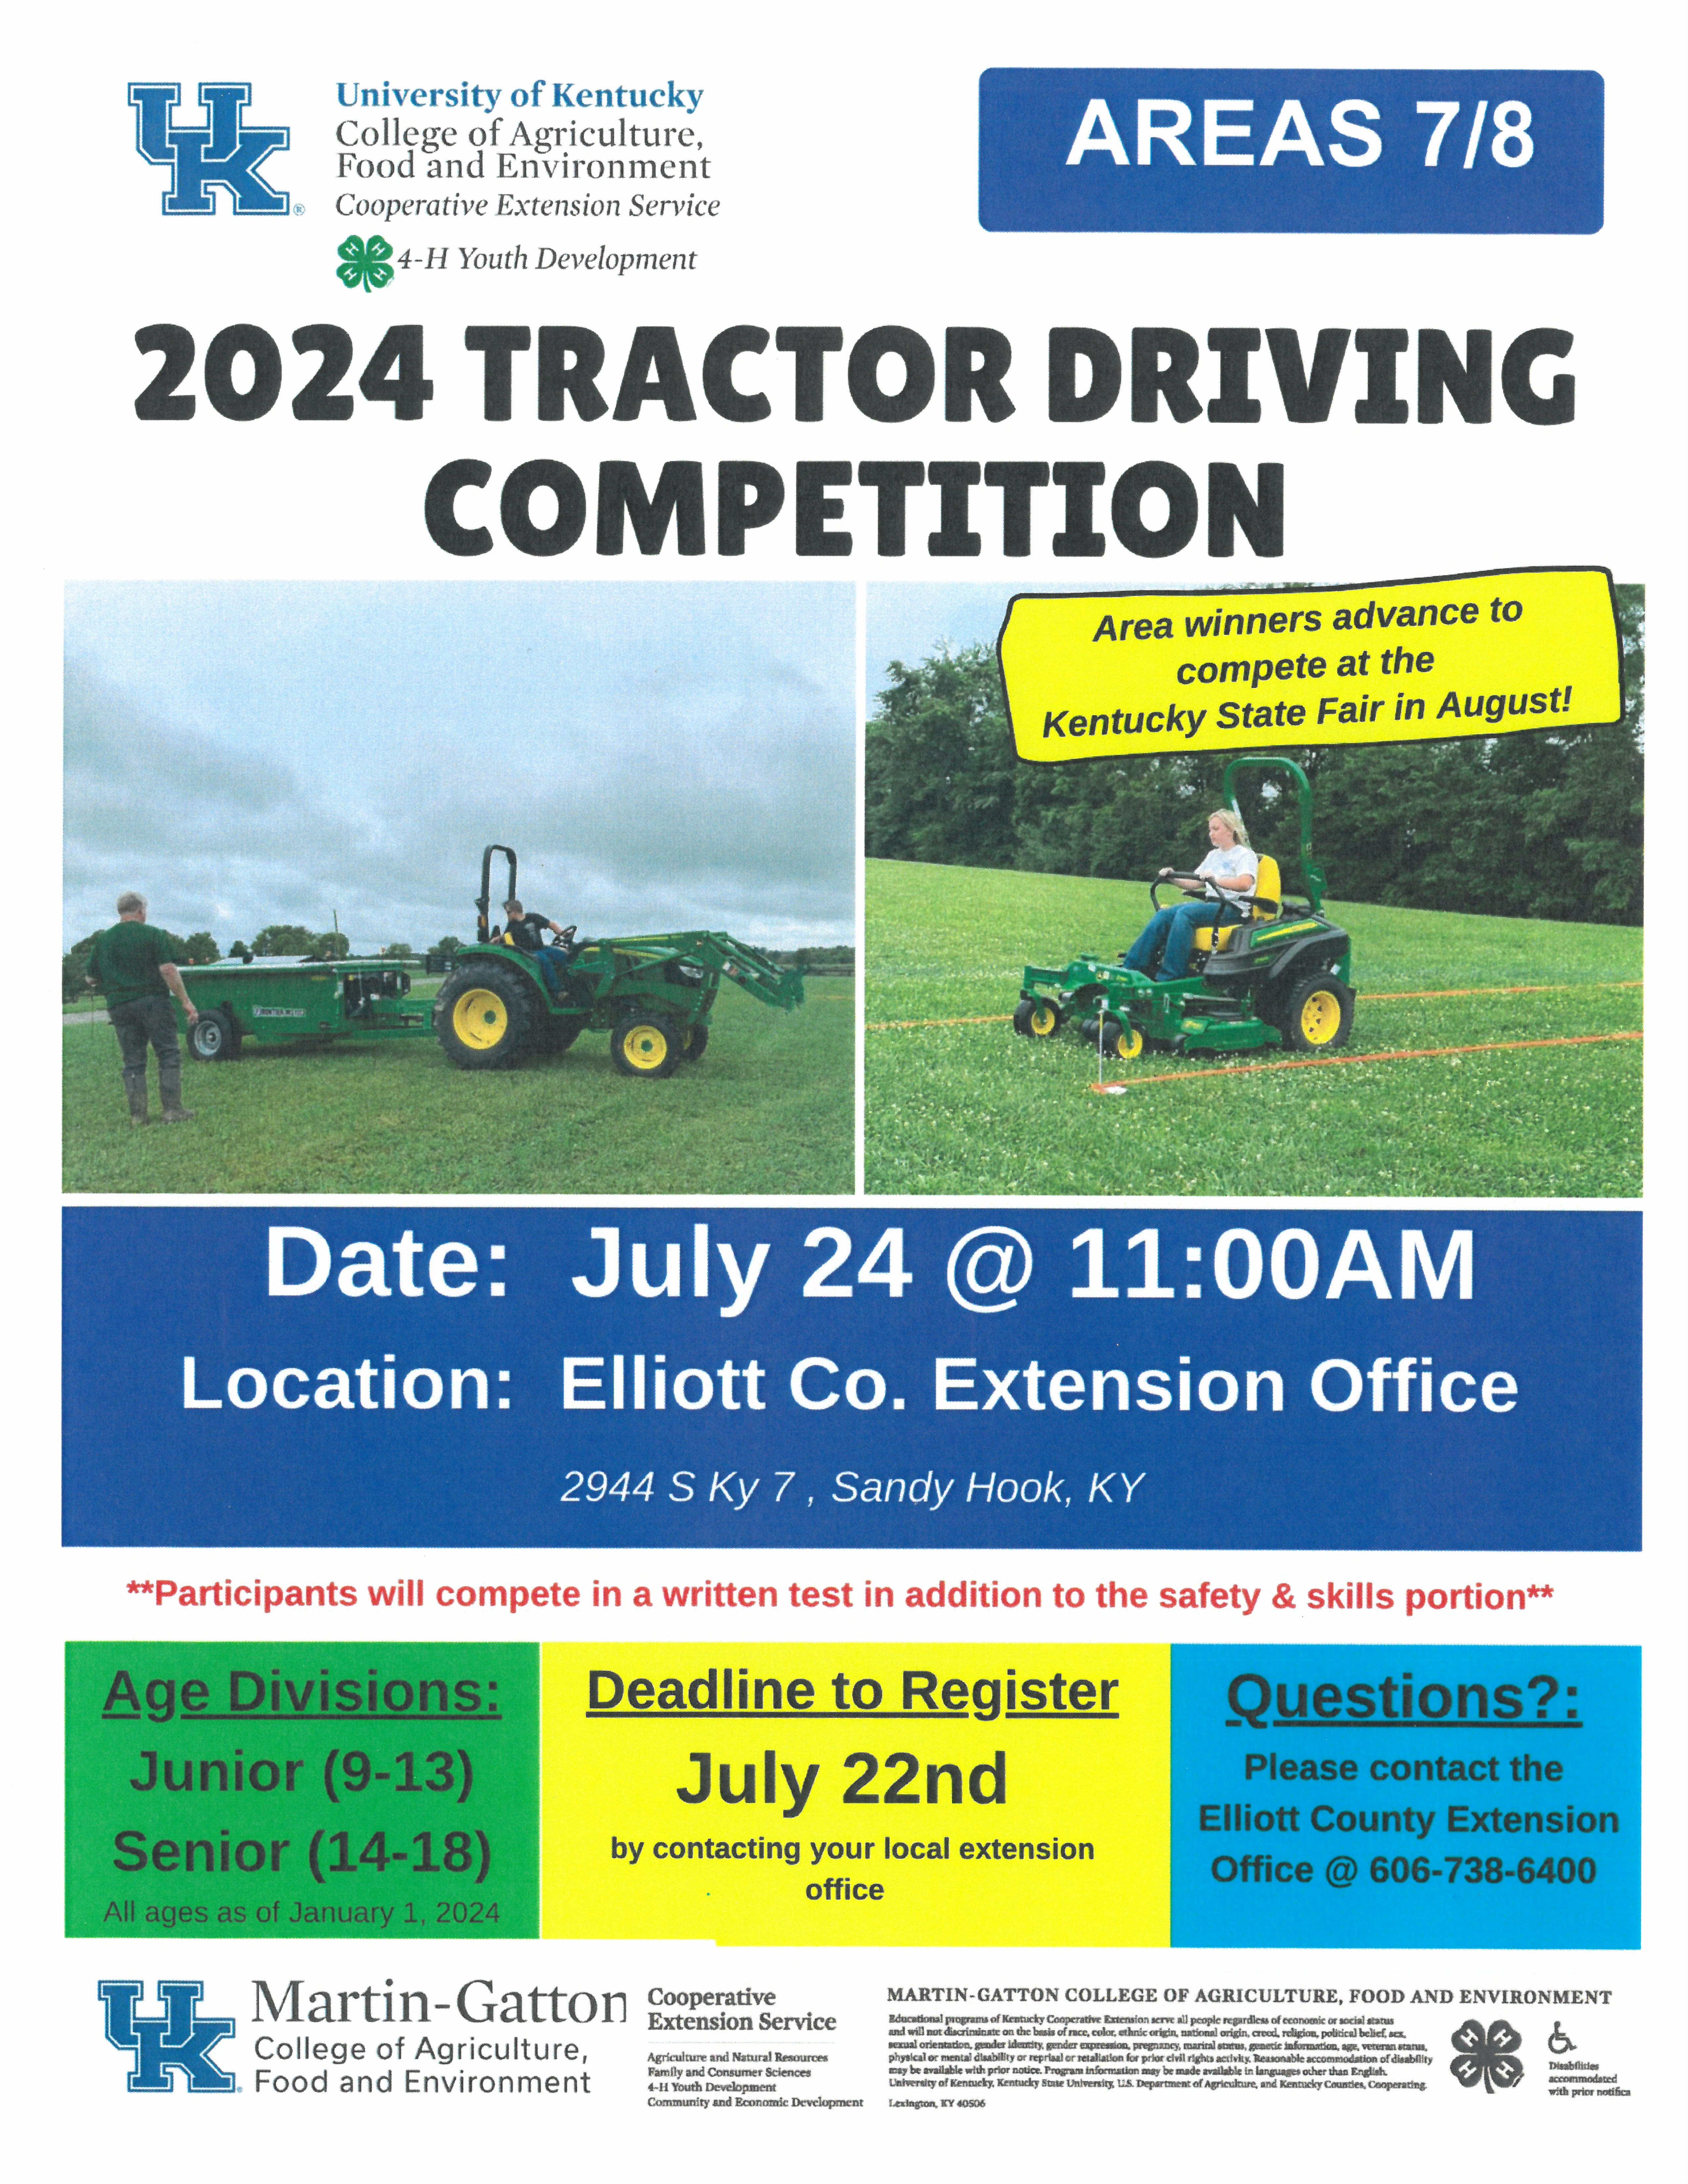 2024 Tractor Driving Competition flyer